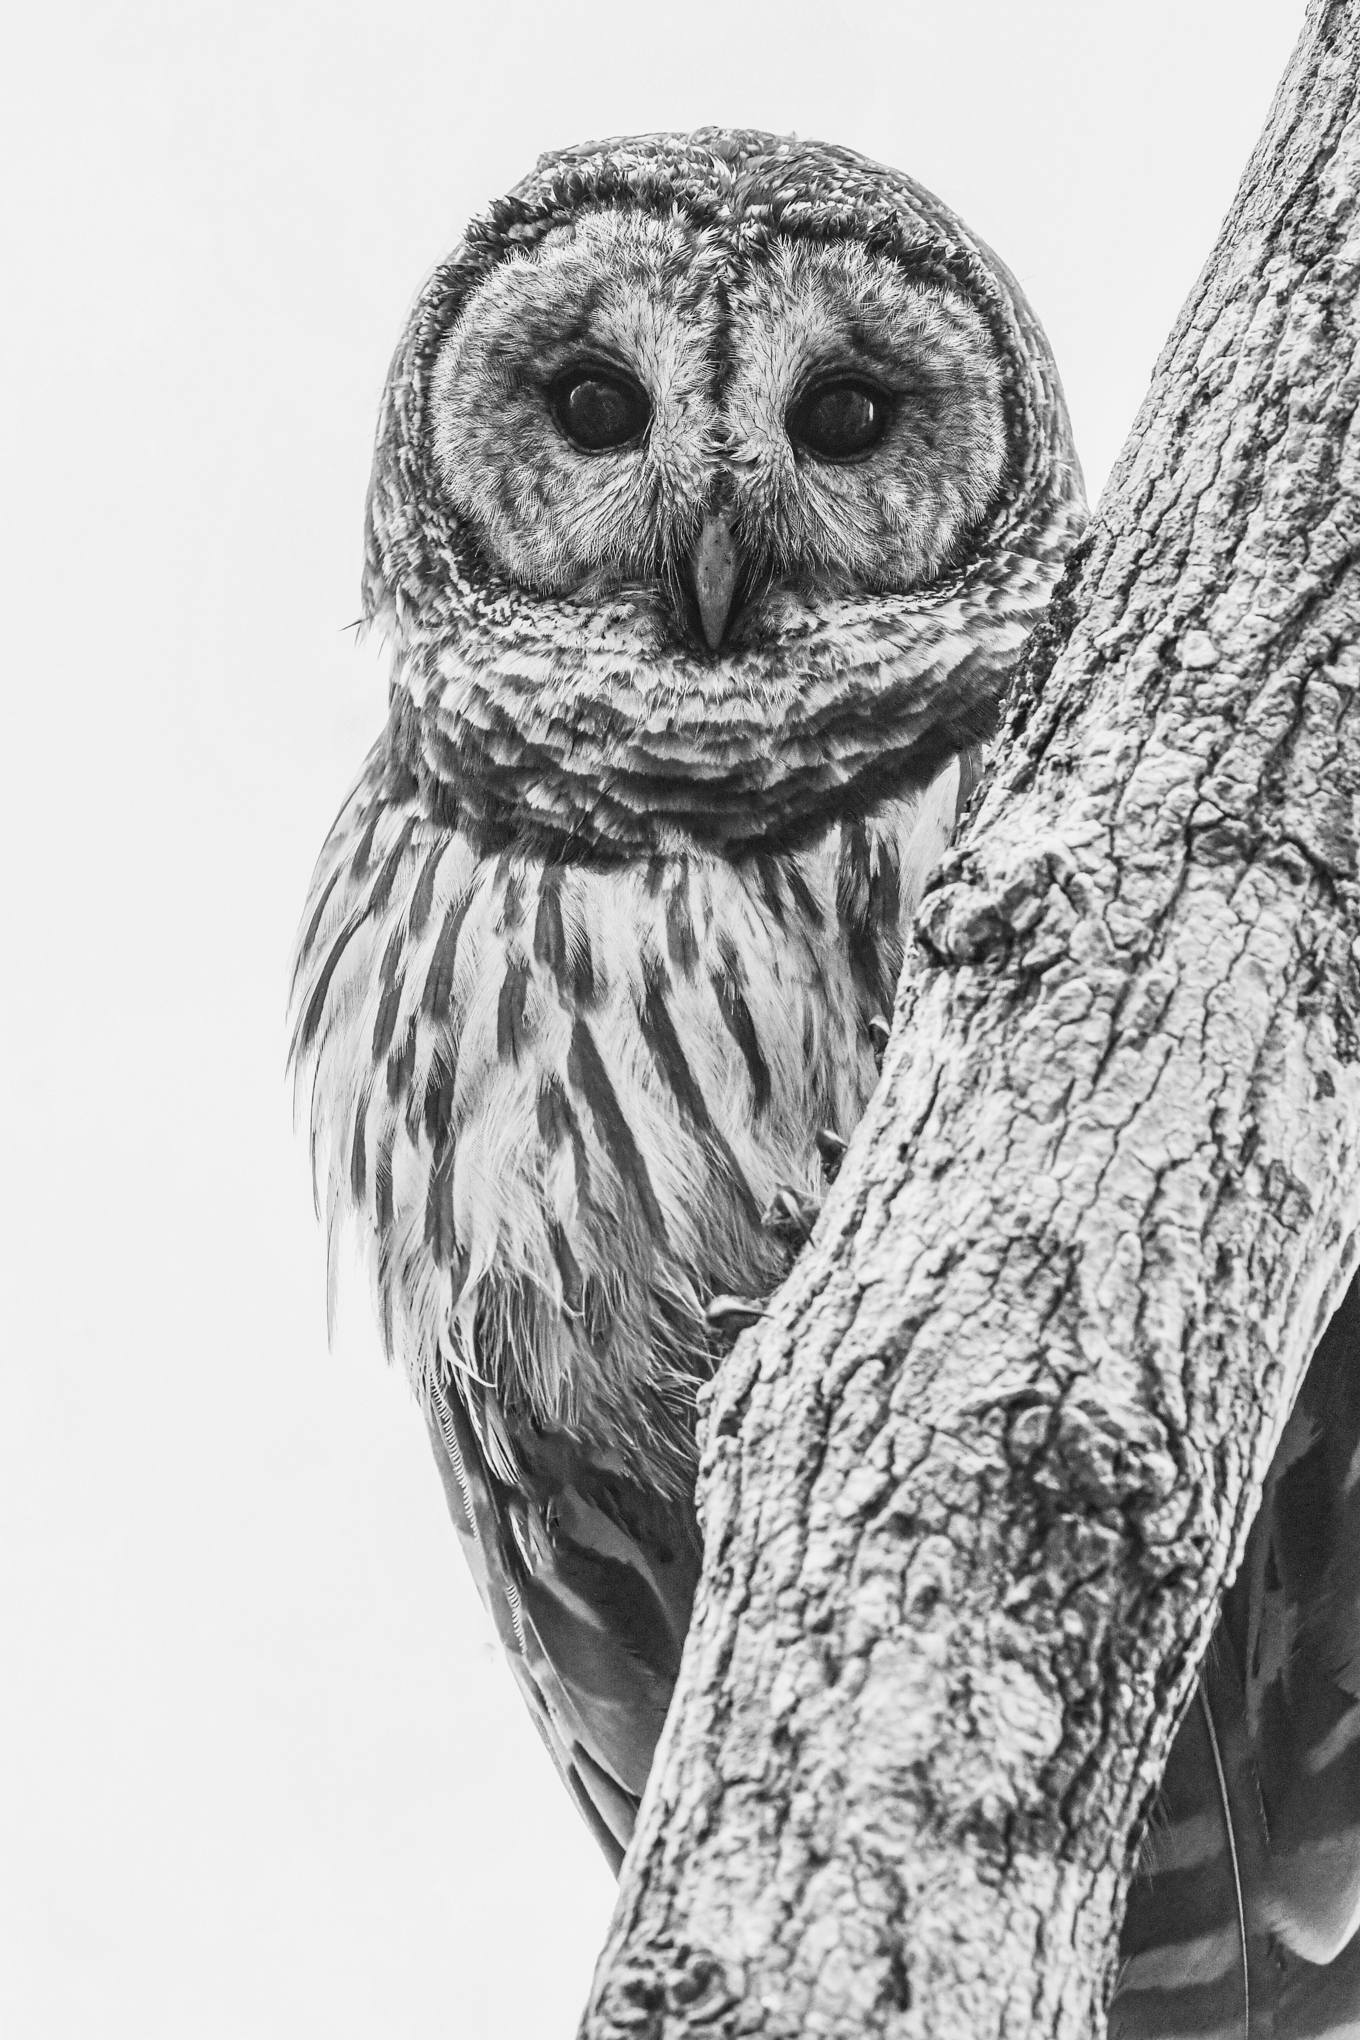 Andy crawford photography barred owl in contrast cse296